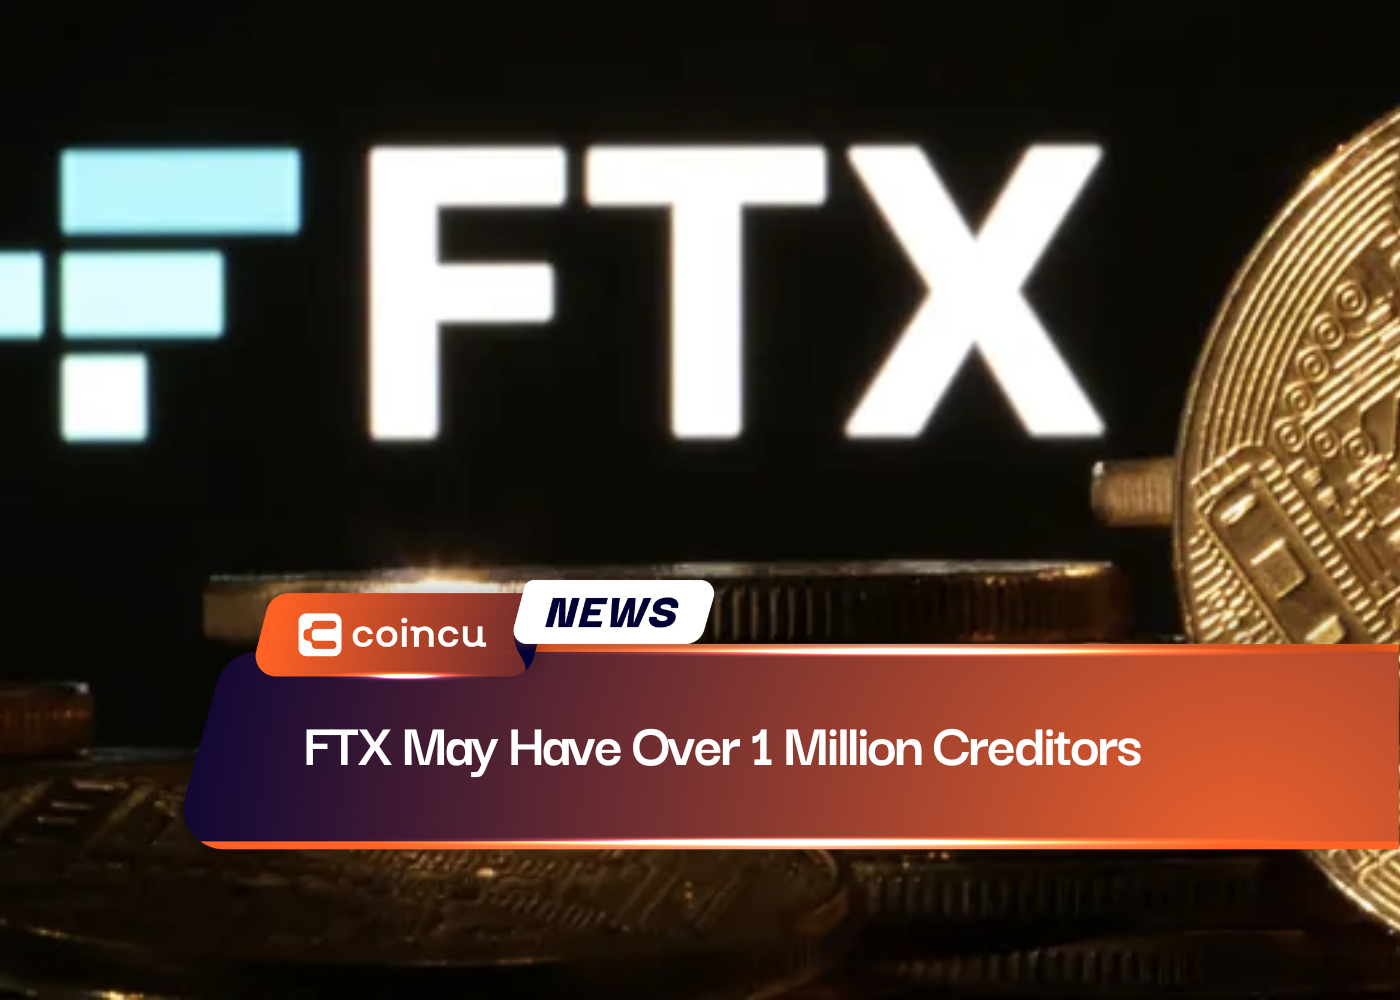 FTX May Have Over 1 Million Creditors